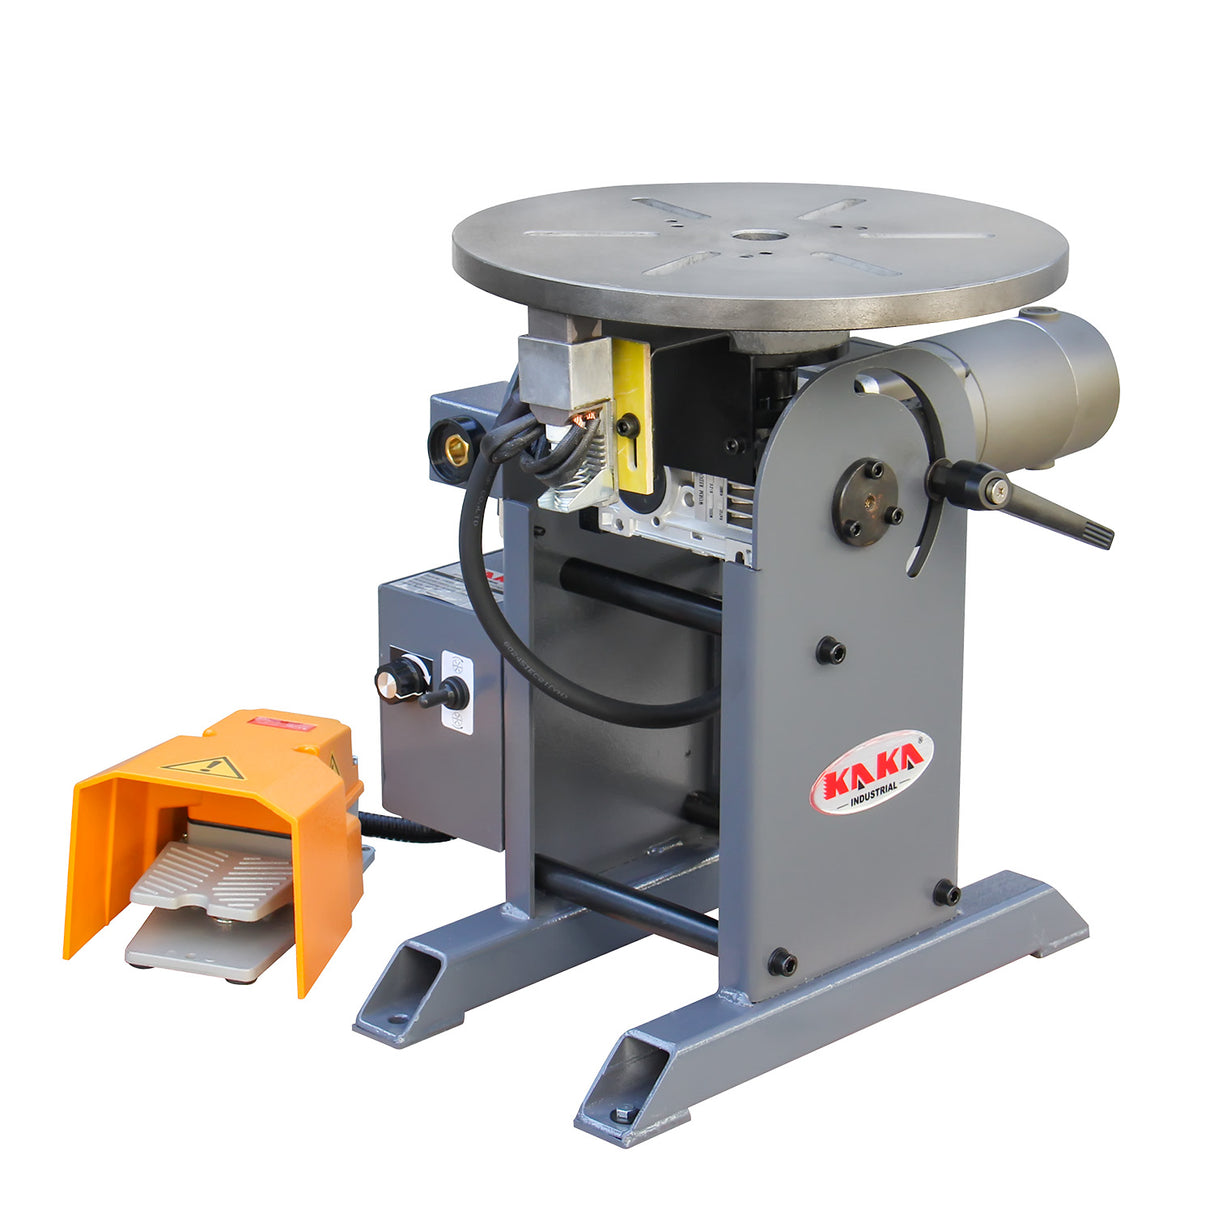 KANG Industrial Welding Positioner Rotating table for welding WP220